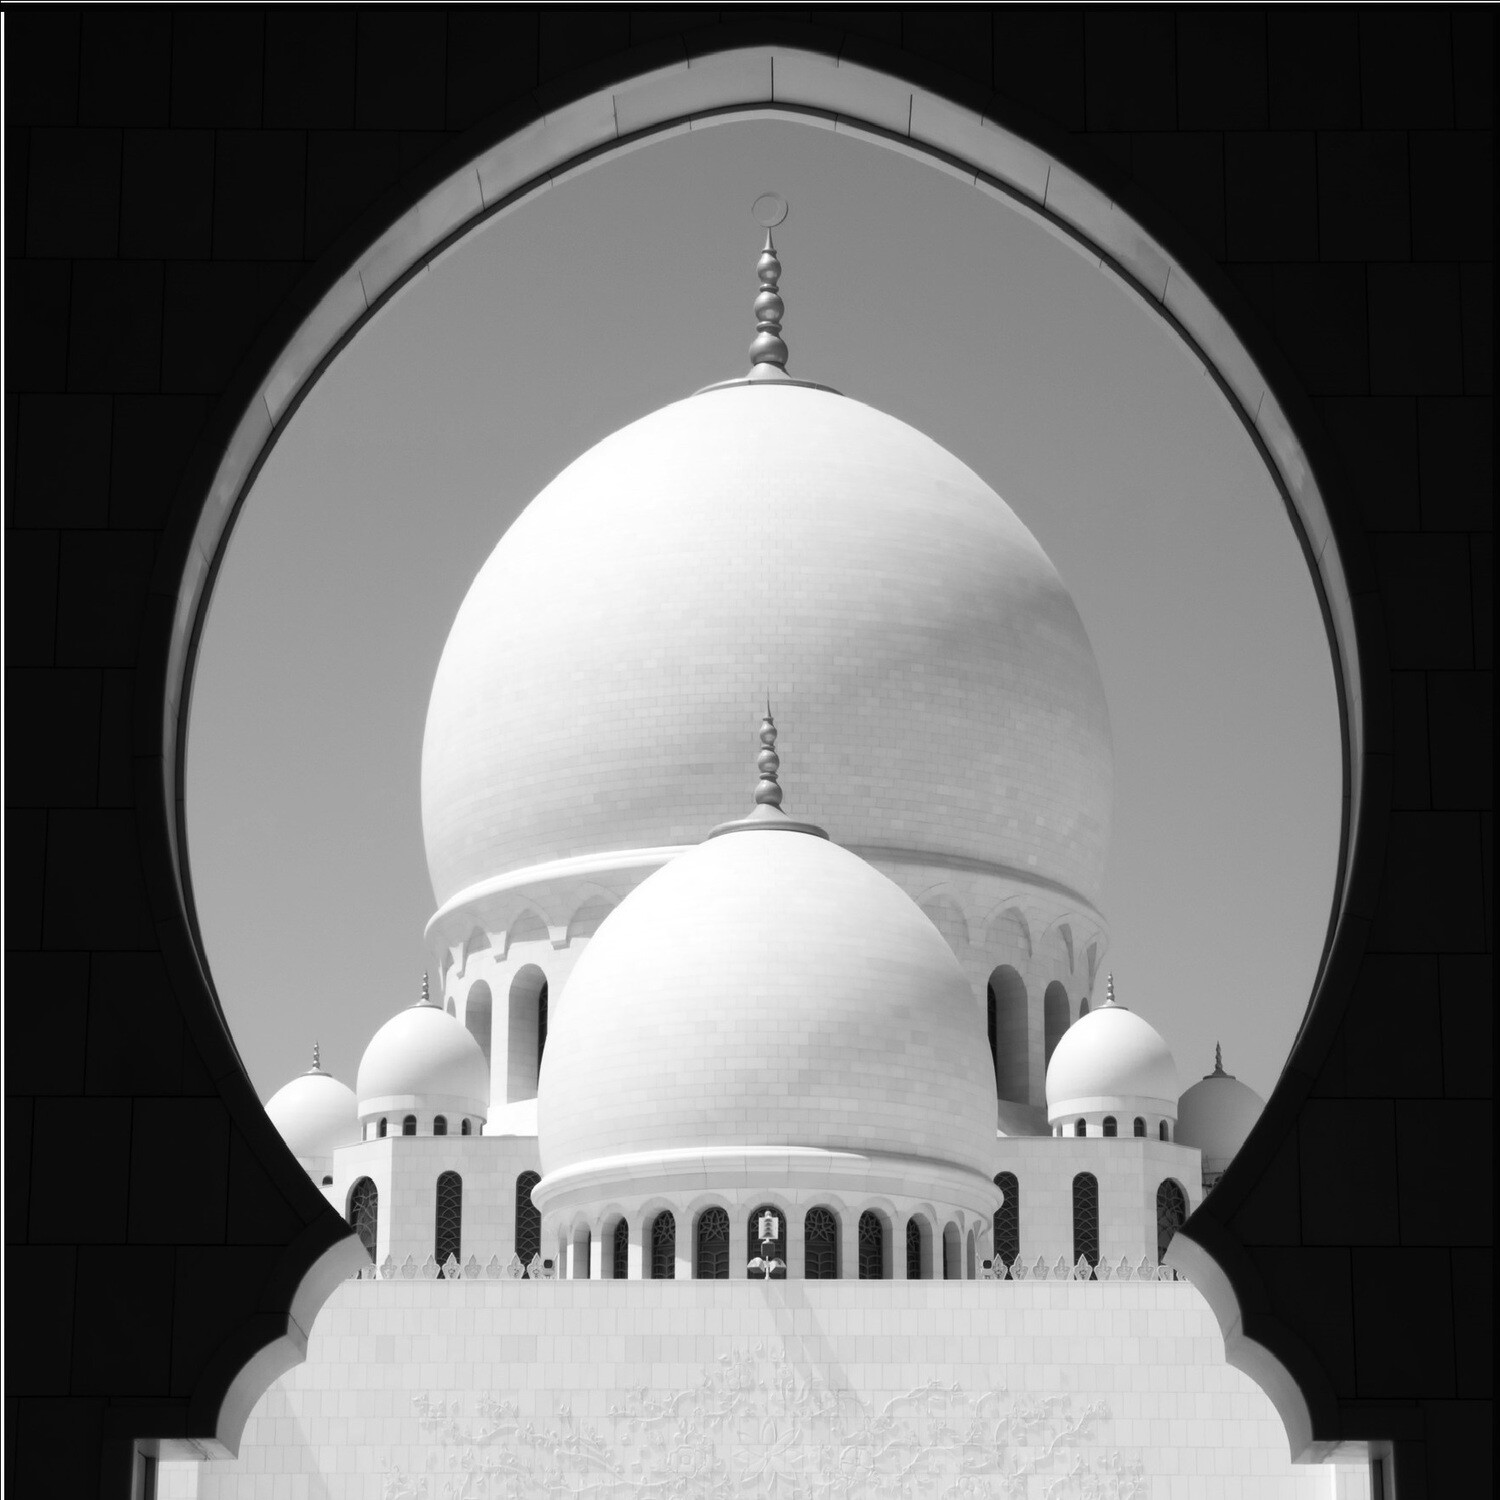 The Grand Mosque Domes Greeting Card